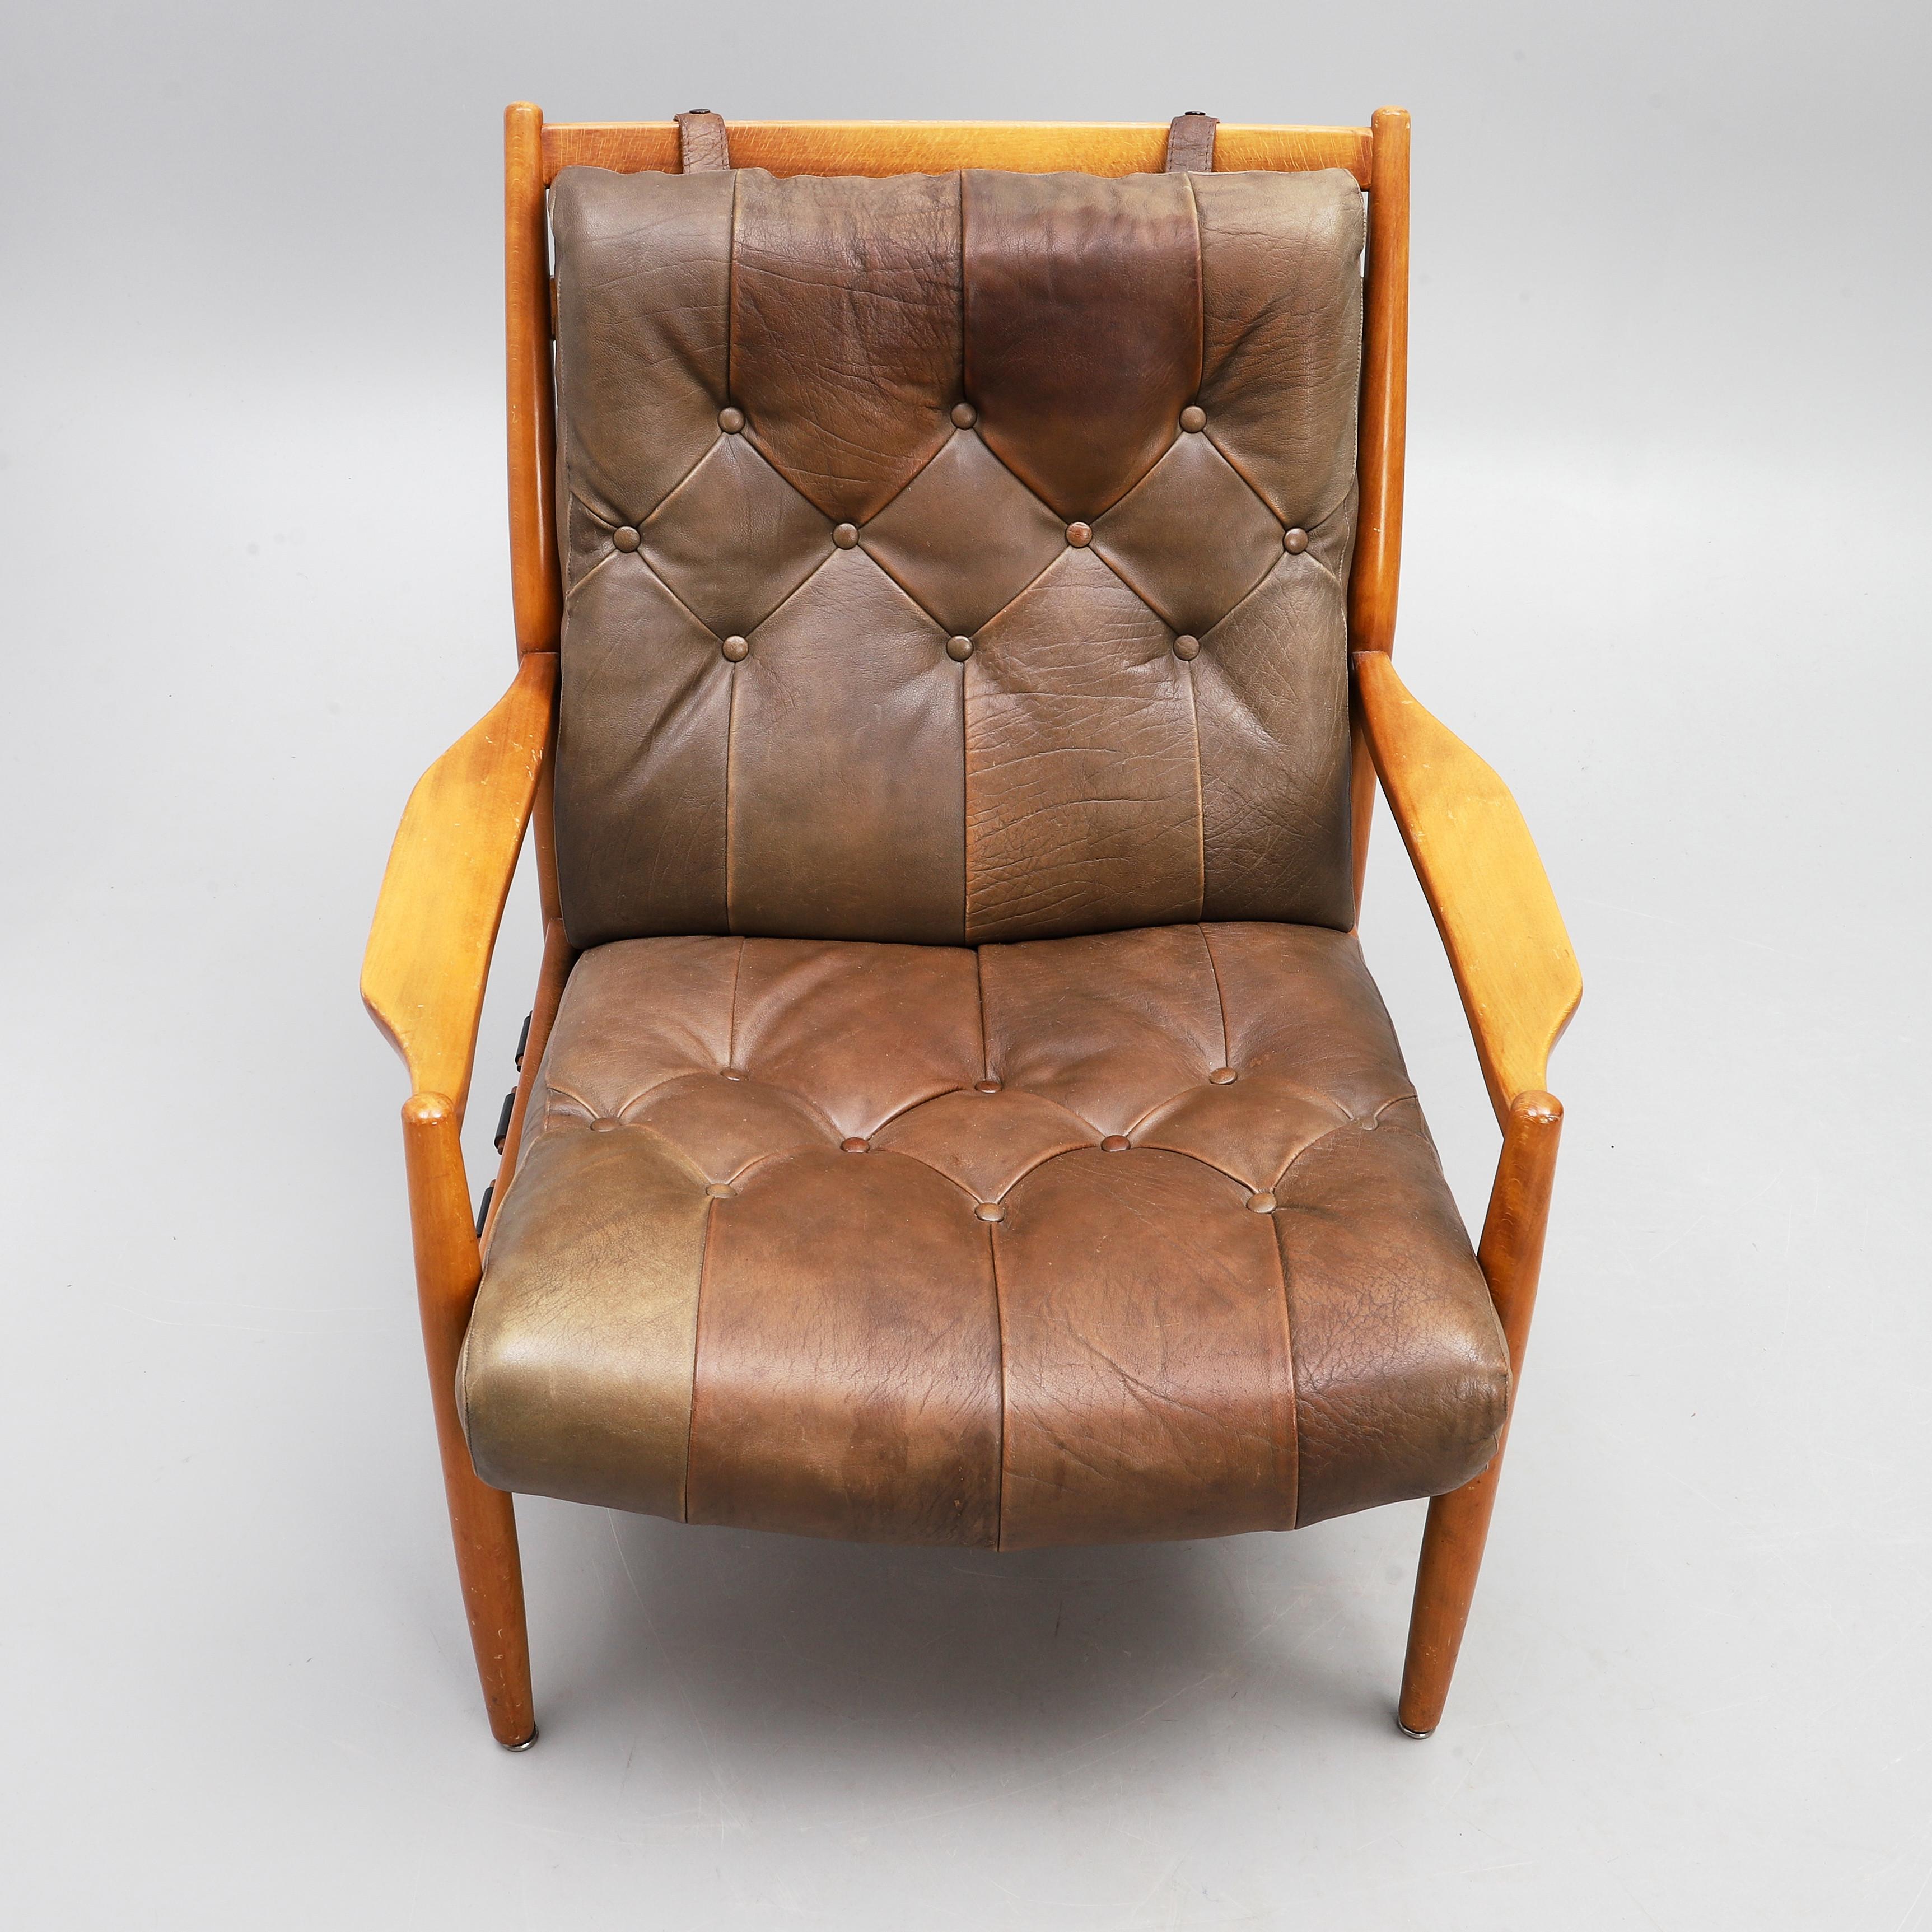 Ingemar Thillmark ‘Läckö Hög’ an armchairs for OPE from the 1960s. Frame made from stained beech. Deep padded seats dressed with leather. The leathers seats have some signs of wear and fading – see pictures. The armchairs are in good vintage